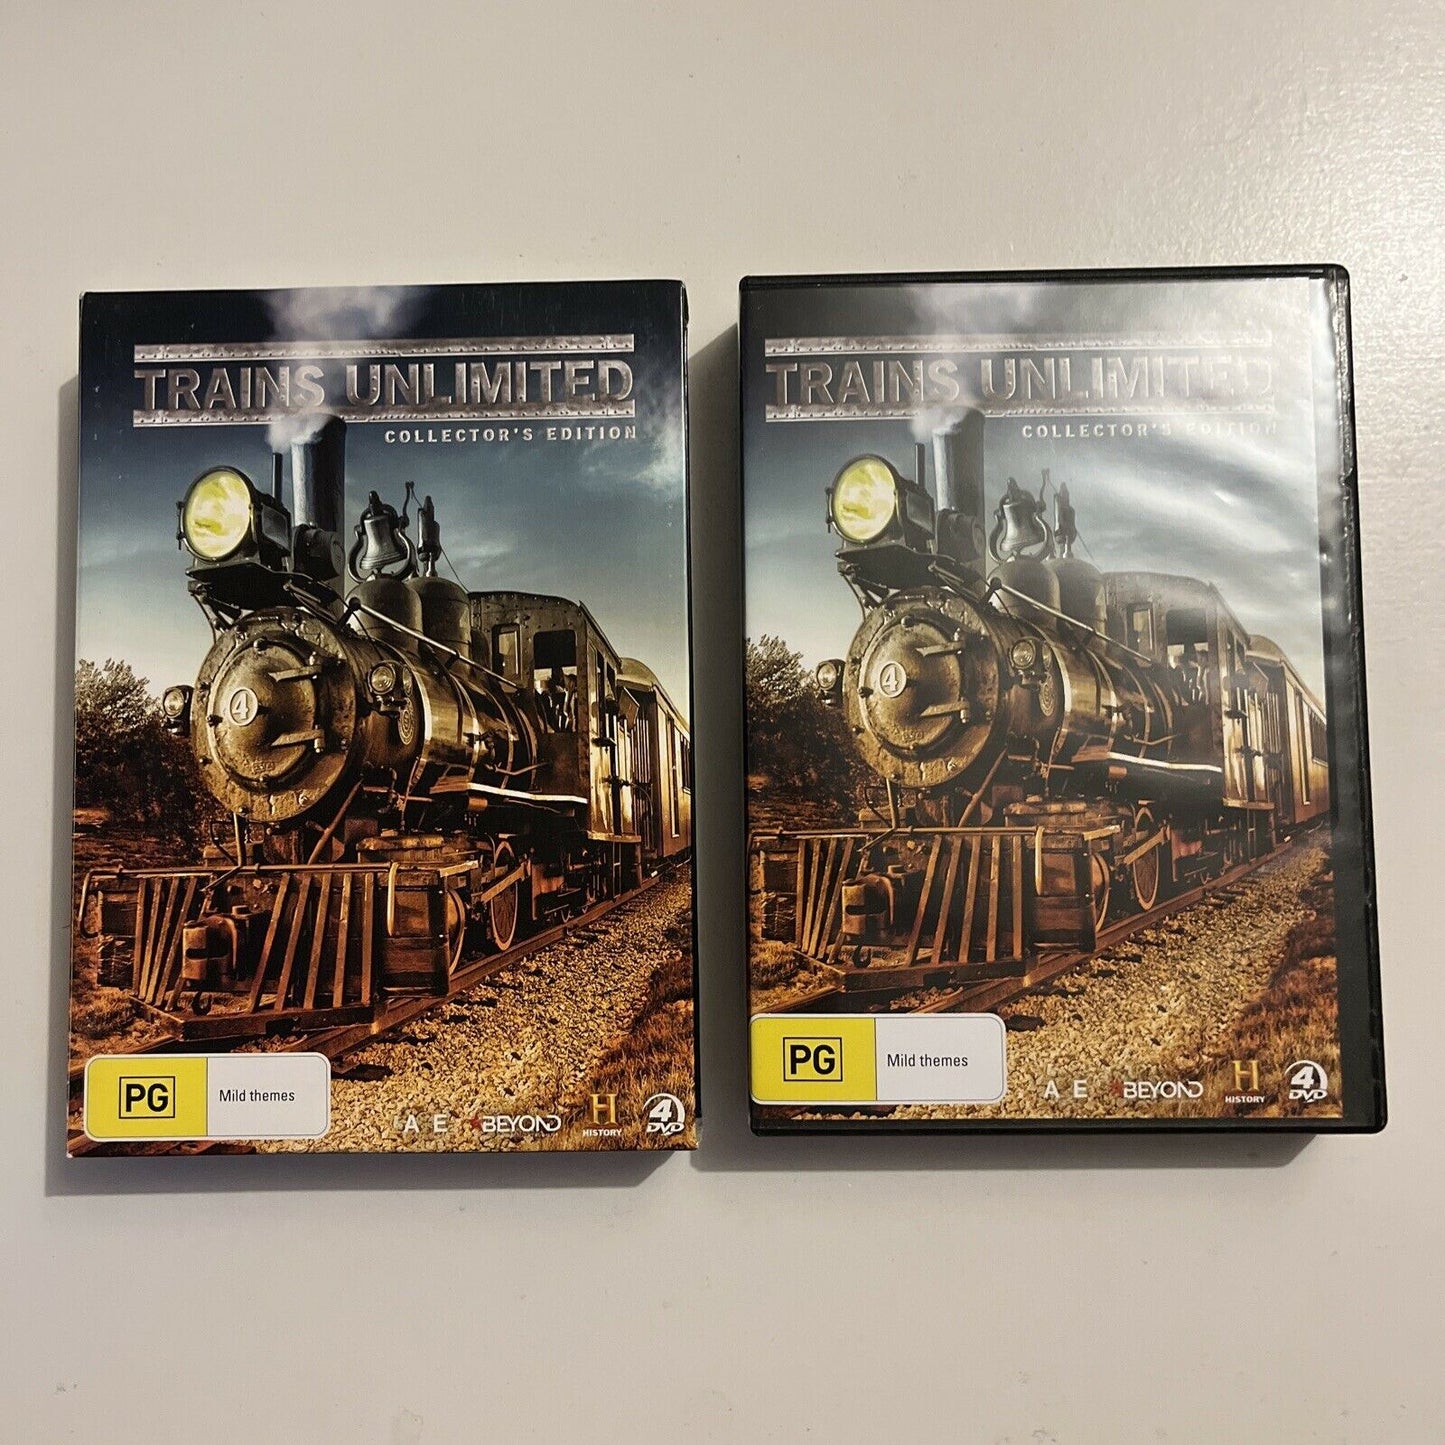 Trains Unlimited - Collector's Edition (DVD, 2019, 4-Disc) Region 4